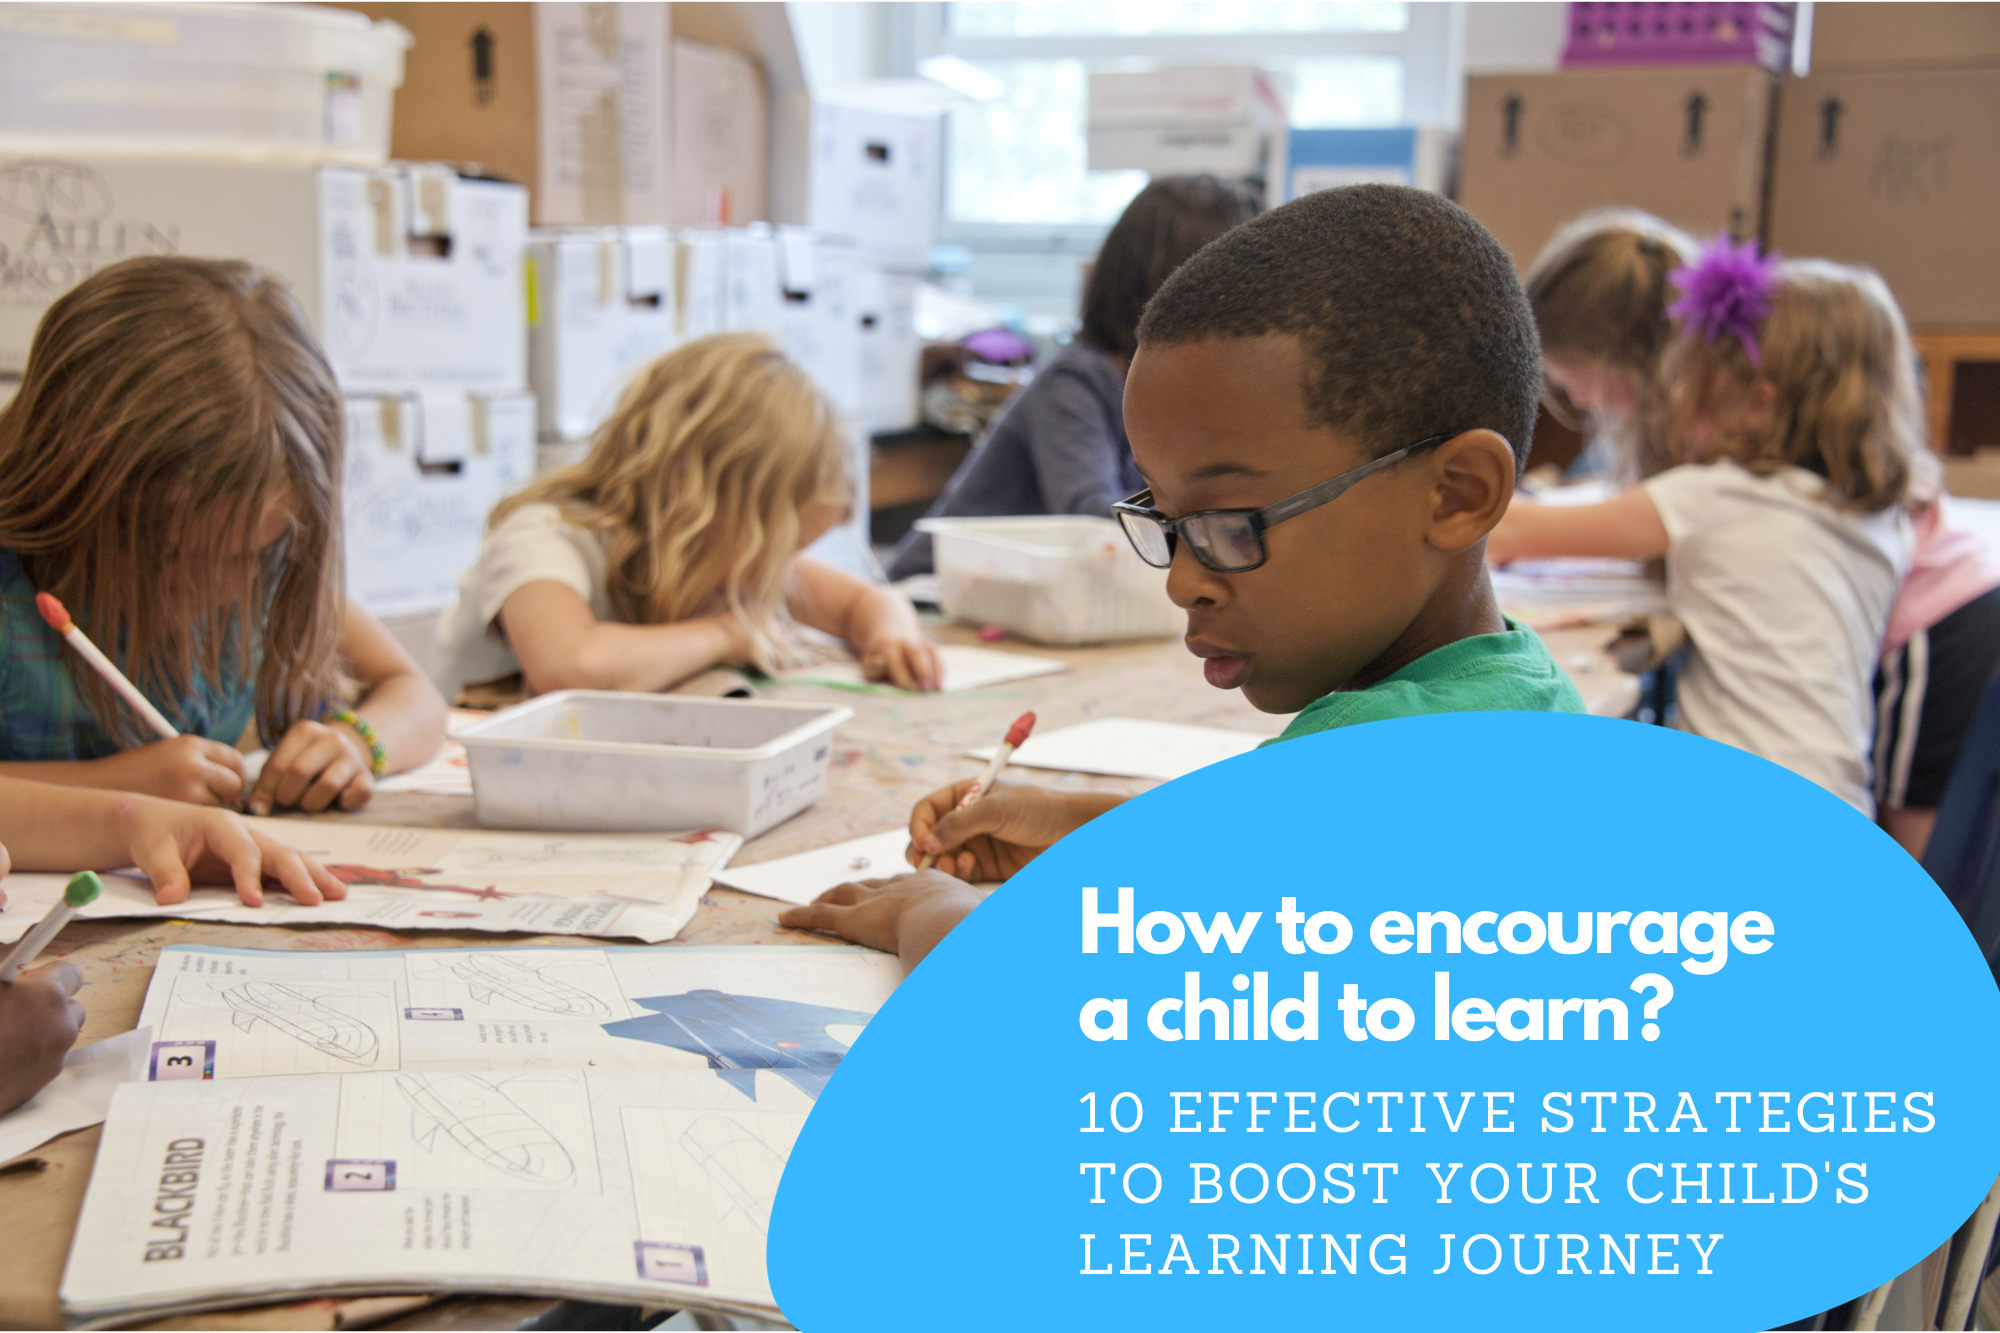 How to encourage a child to learn?